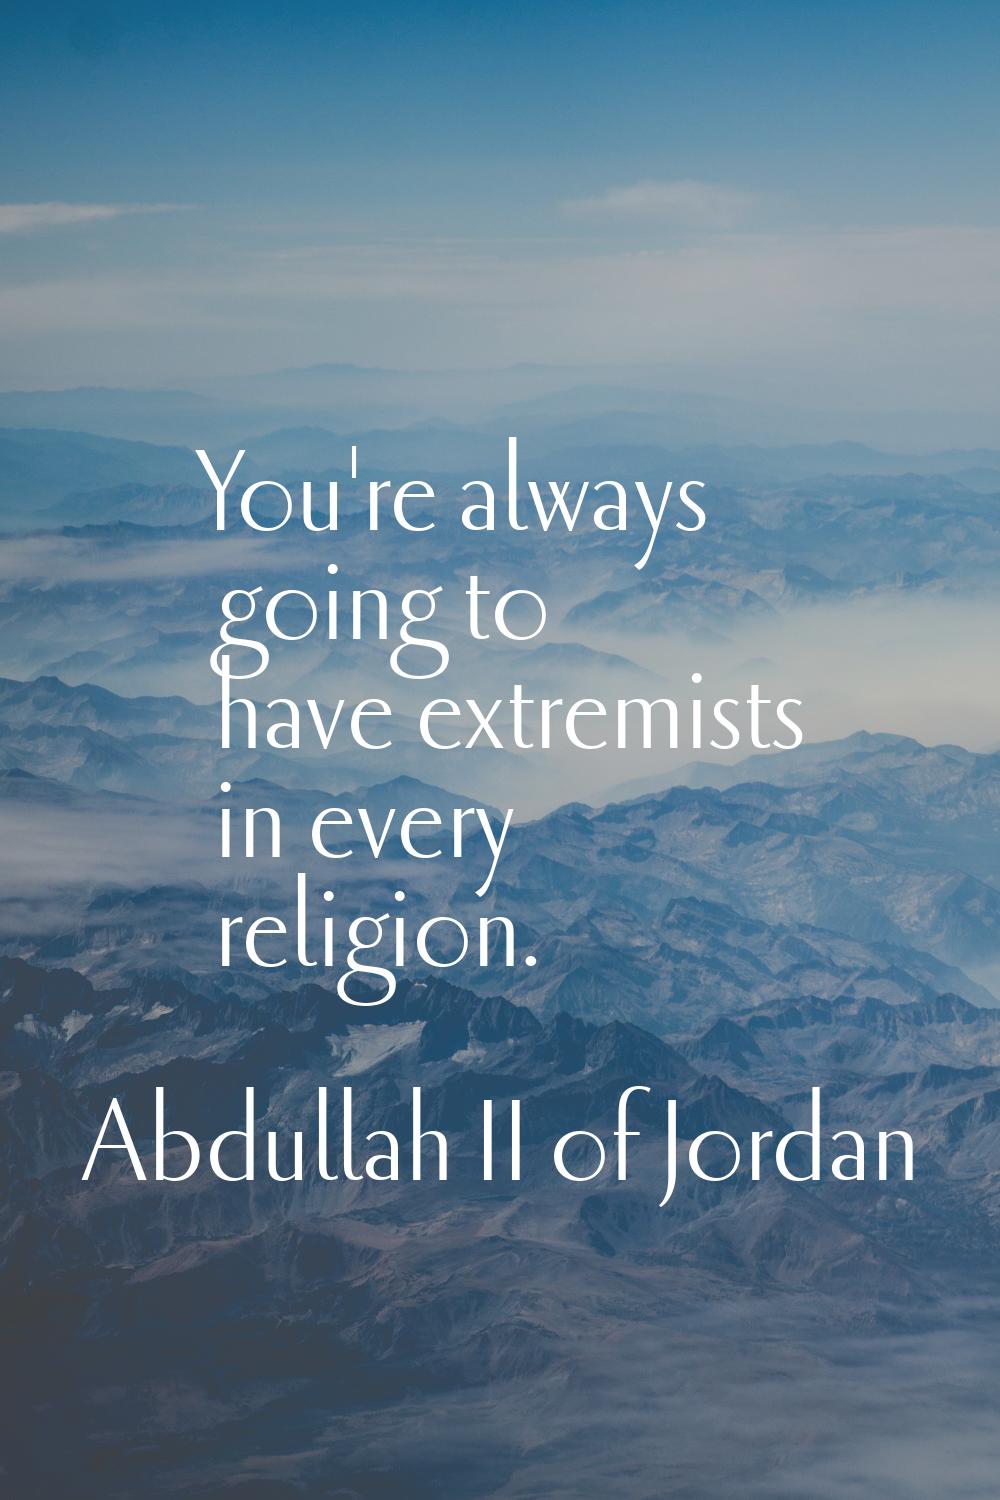 You're always going to have extremists in every religion.